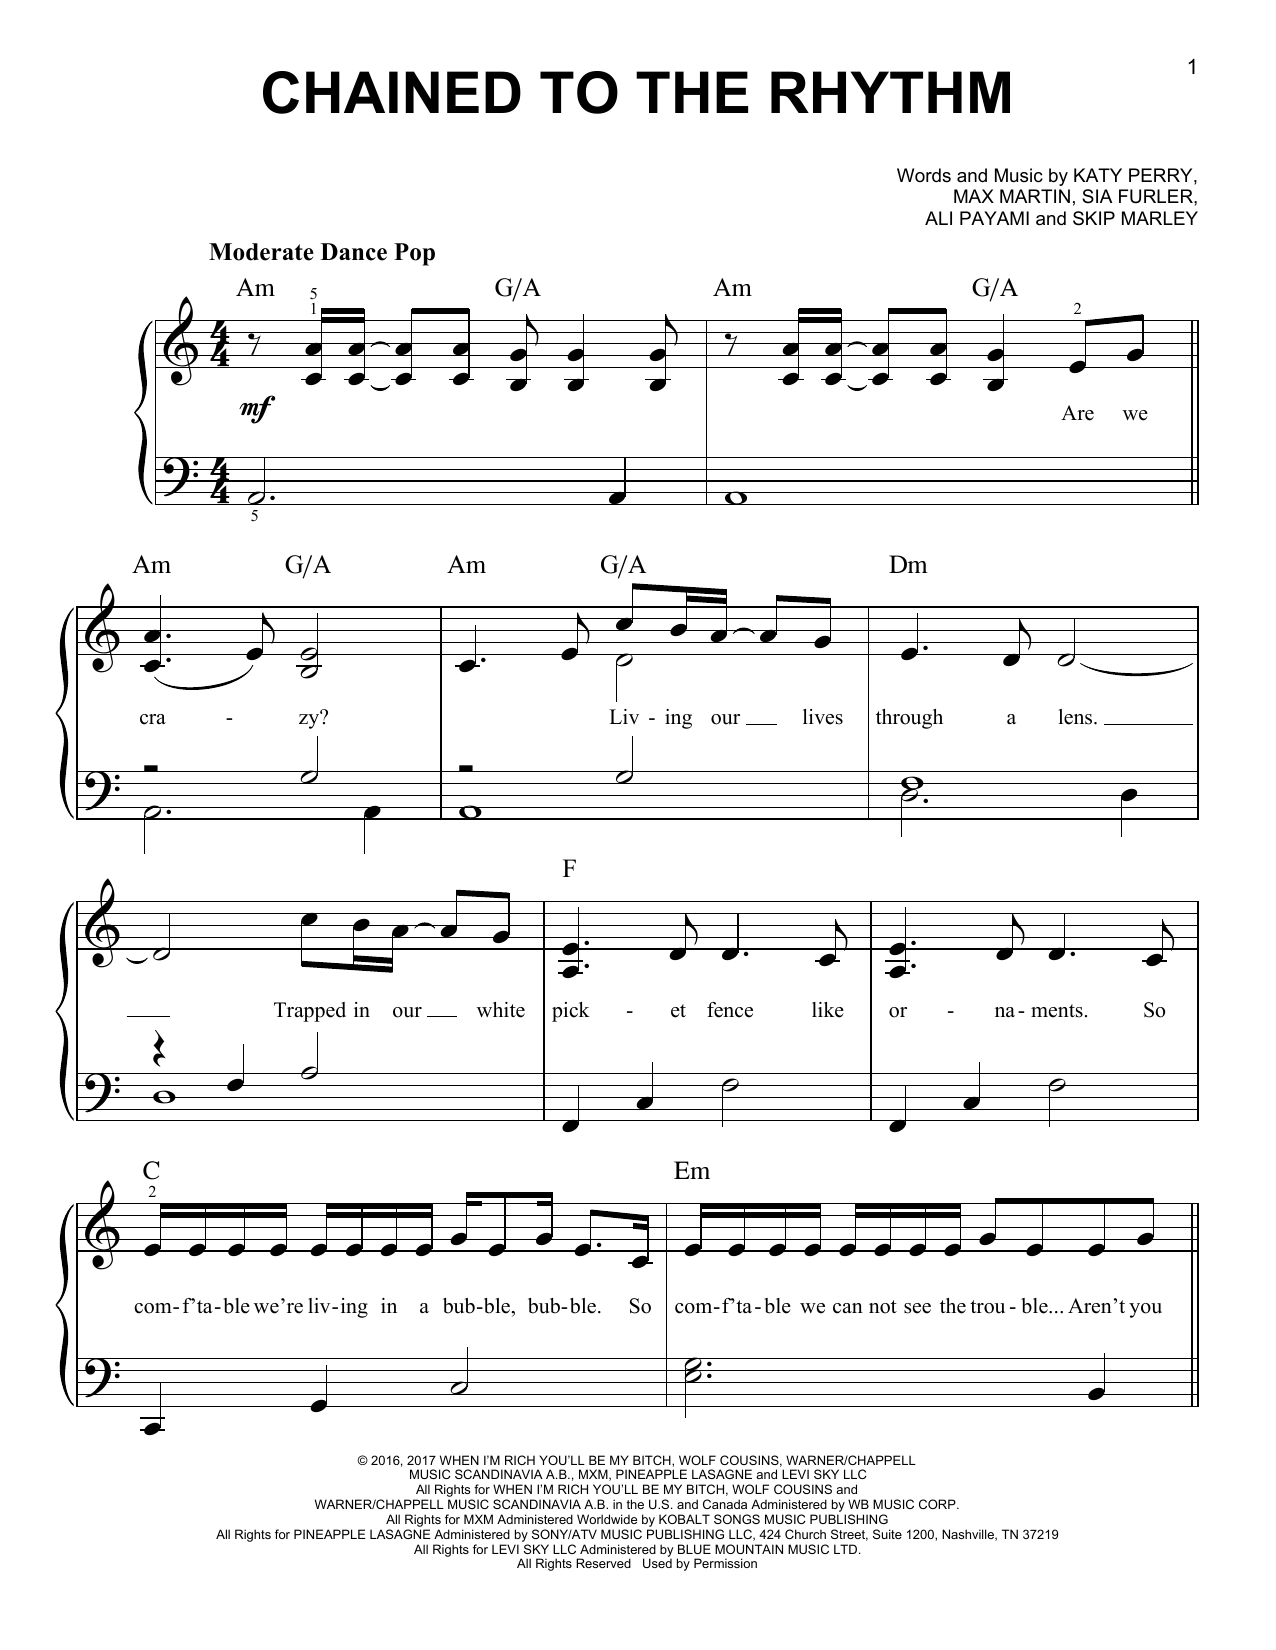 Preview Katy Perry Chained To The Rhythm Rock sheet music, notes and chords for Easy ...